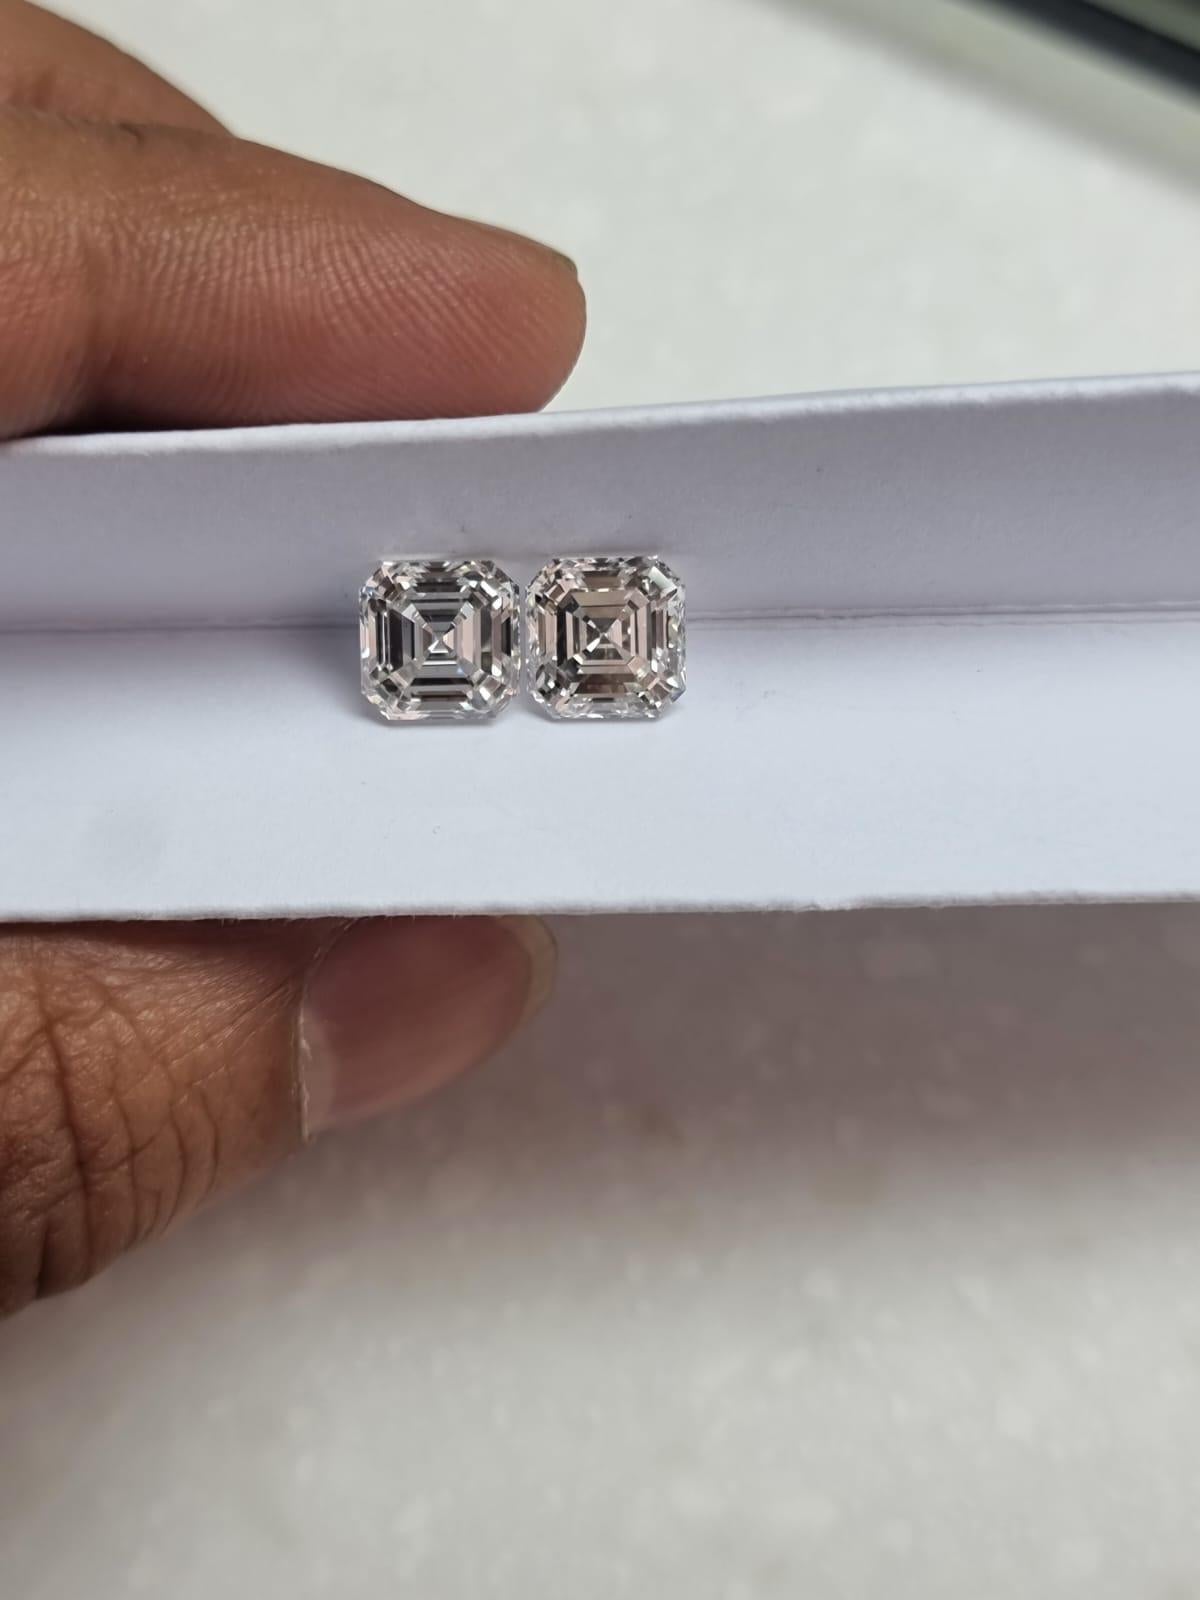 A stunning pair of GIA certified 5.40 carat (2.7 carat each) H color, VS2 clarity. Set in solid 18K White Gold. Comes with push-pull backing. We can customize the design. 